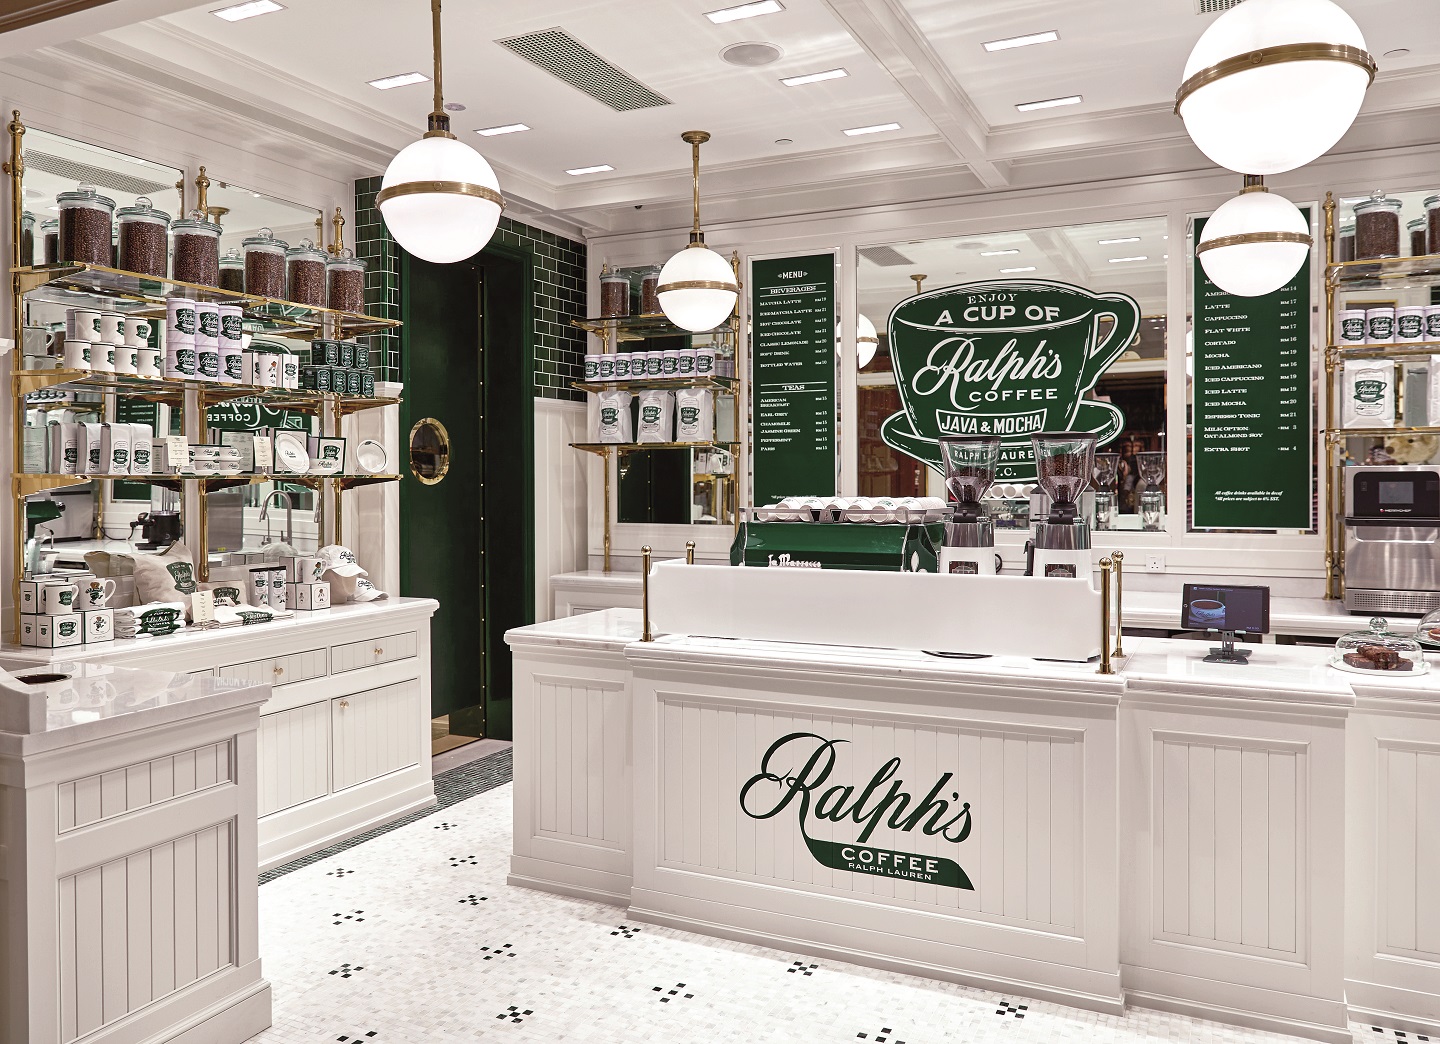 Coffee shop from fashion brand Ralph Lauren opens at Tysons